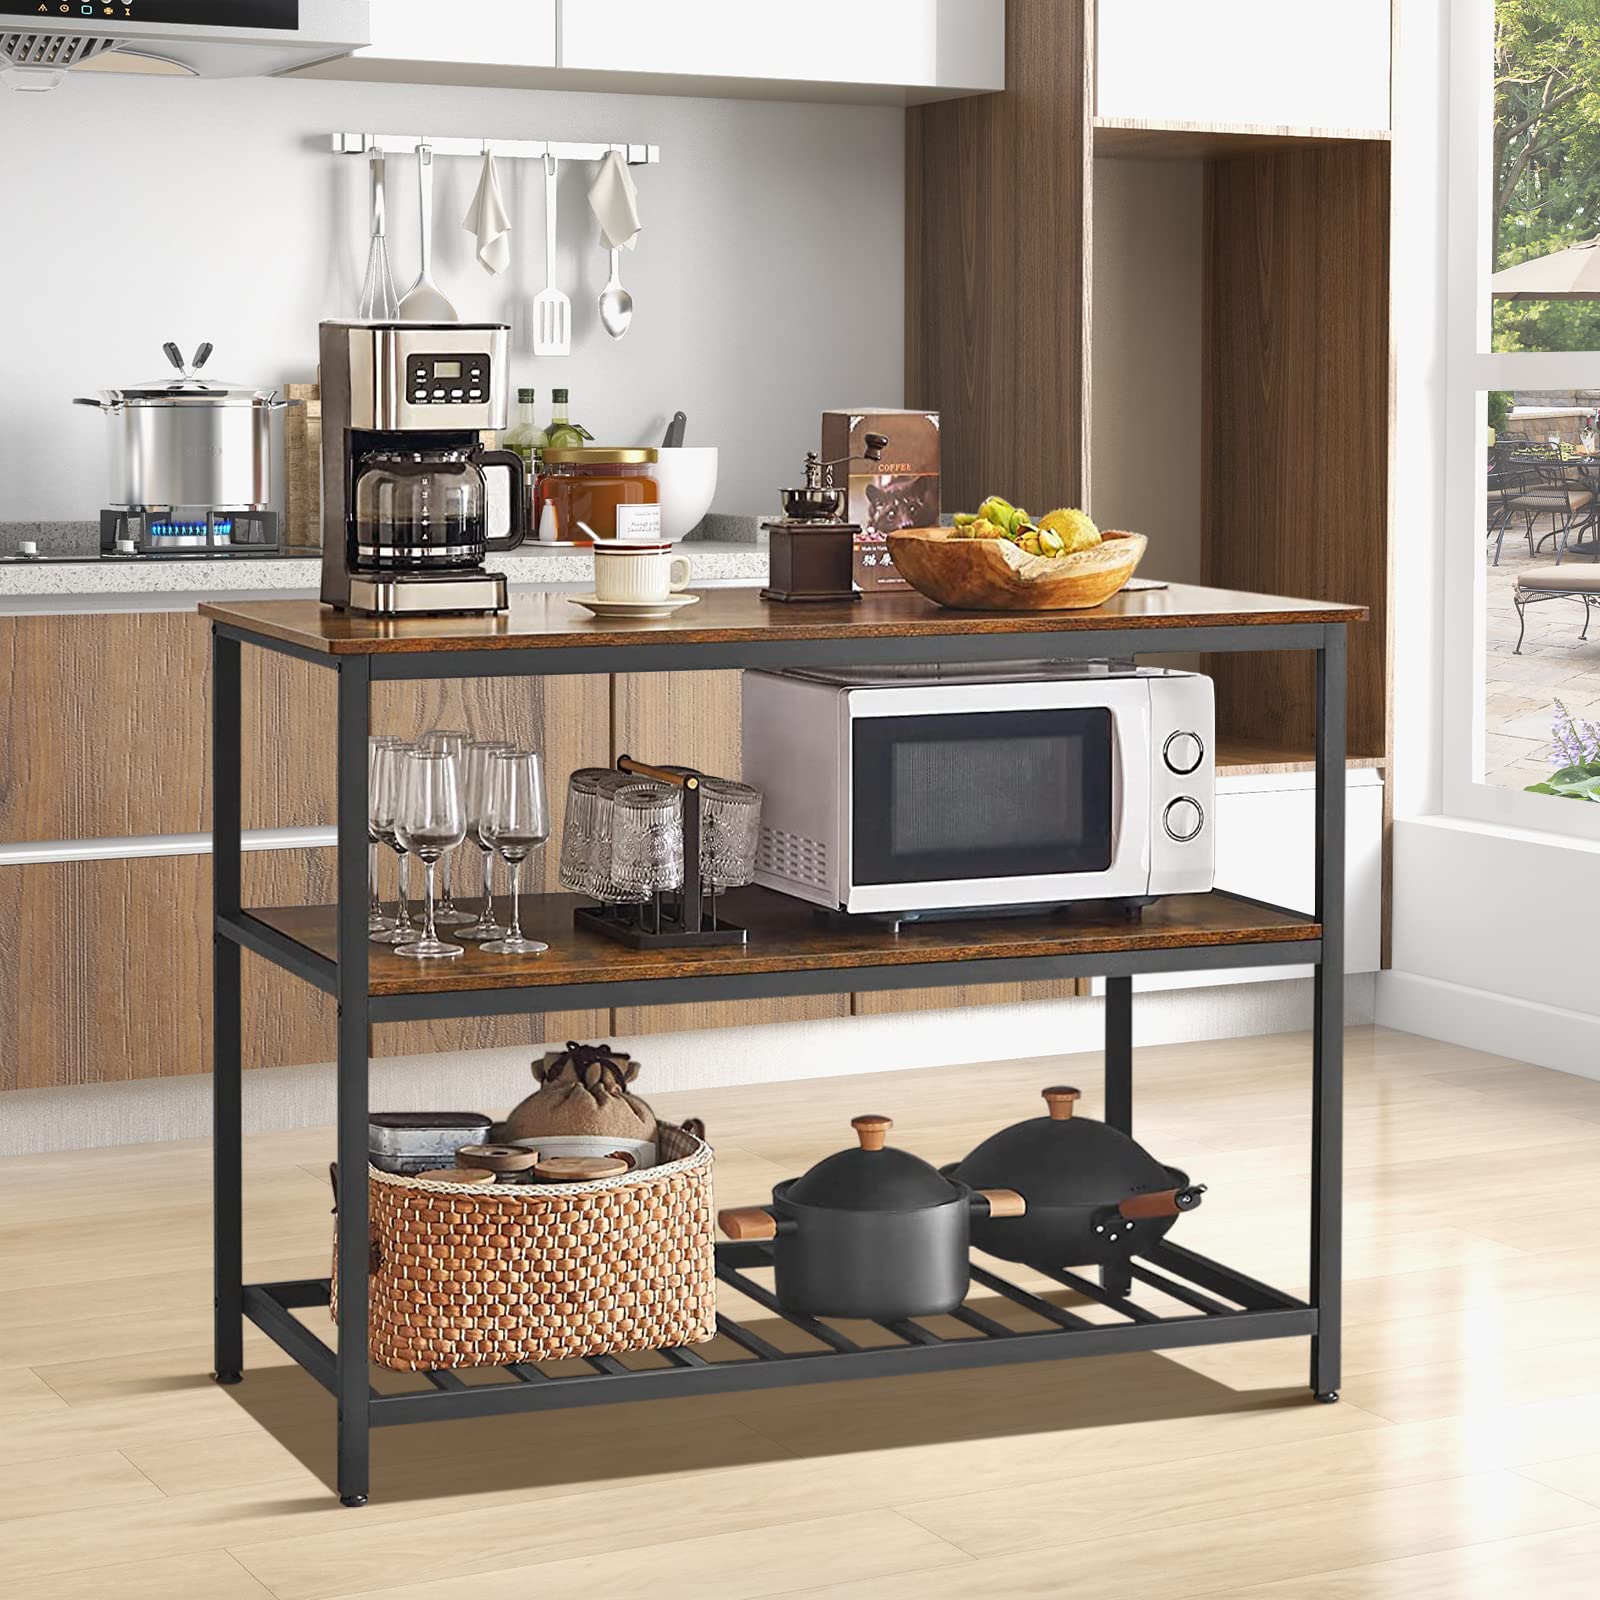 Giantex Kitchen Island with 3 Tier Storage Shelves, 48 Inch Baker Rack with Spacious Worktop (Rustic Brown & Black)